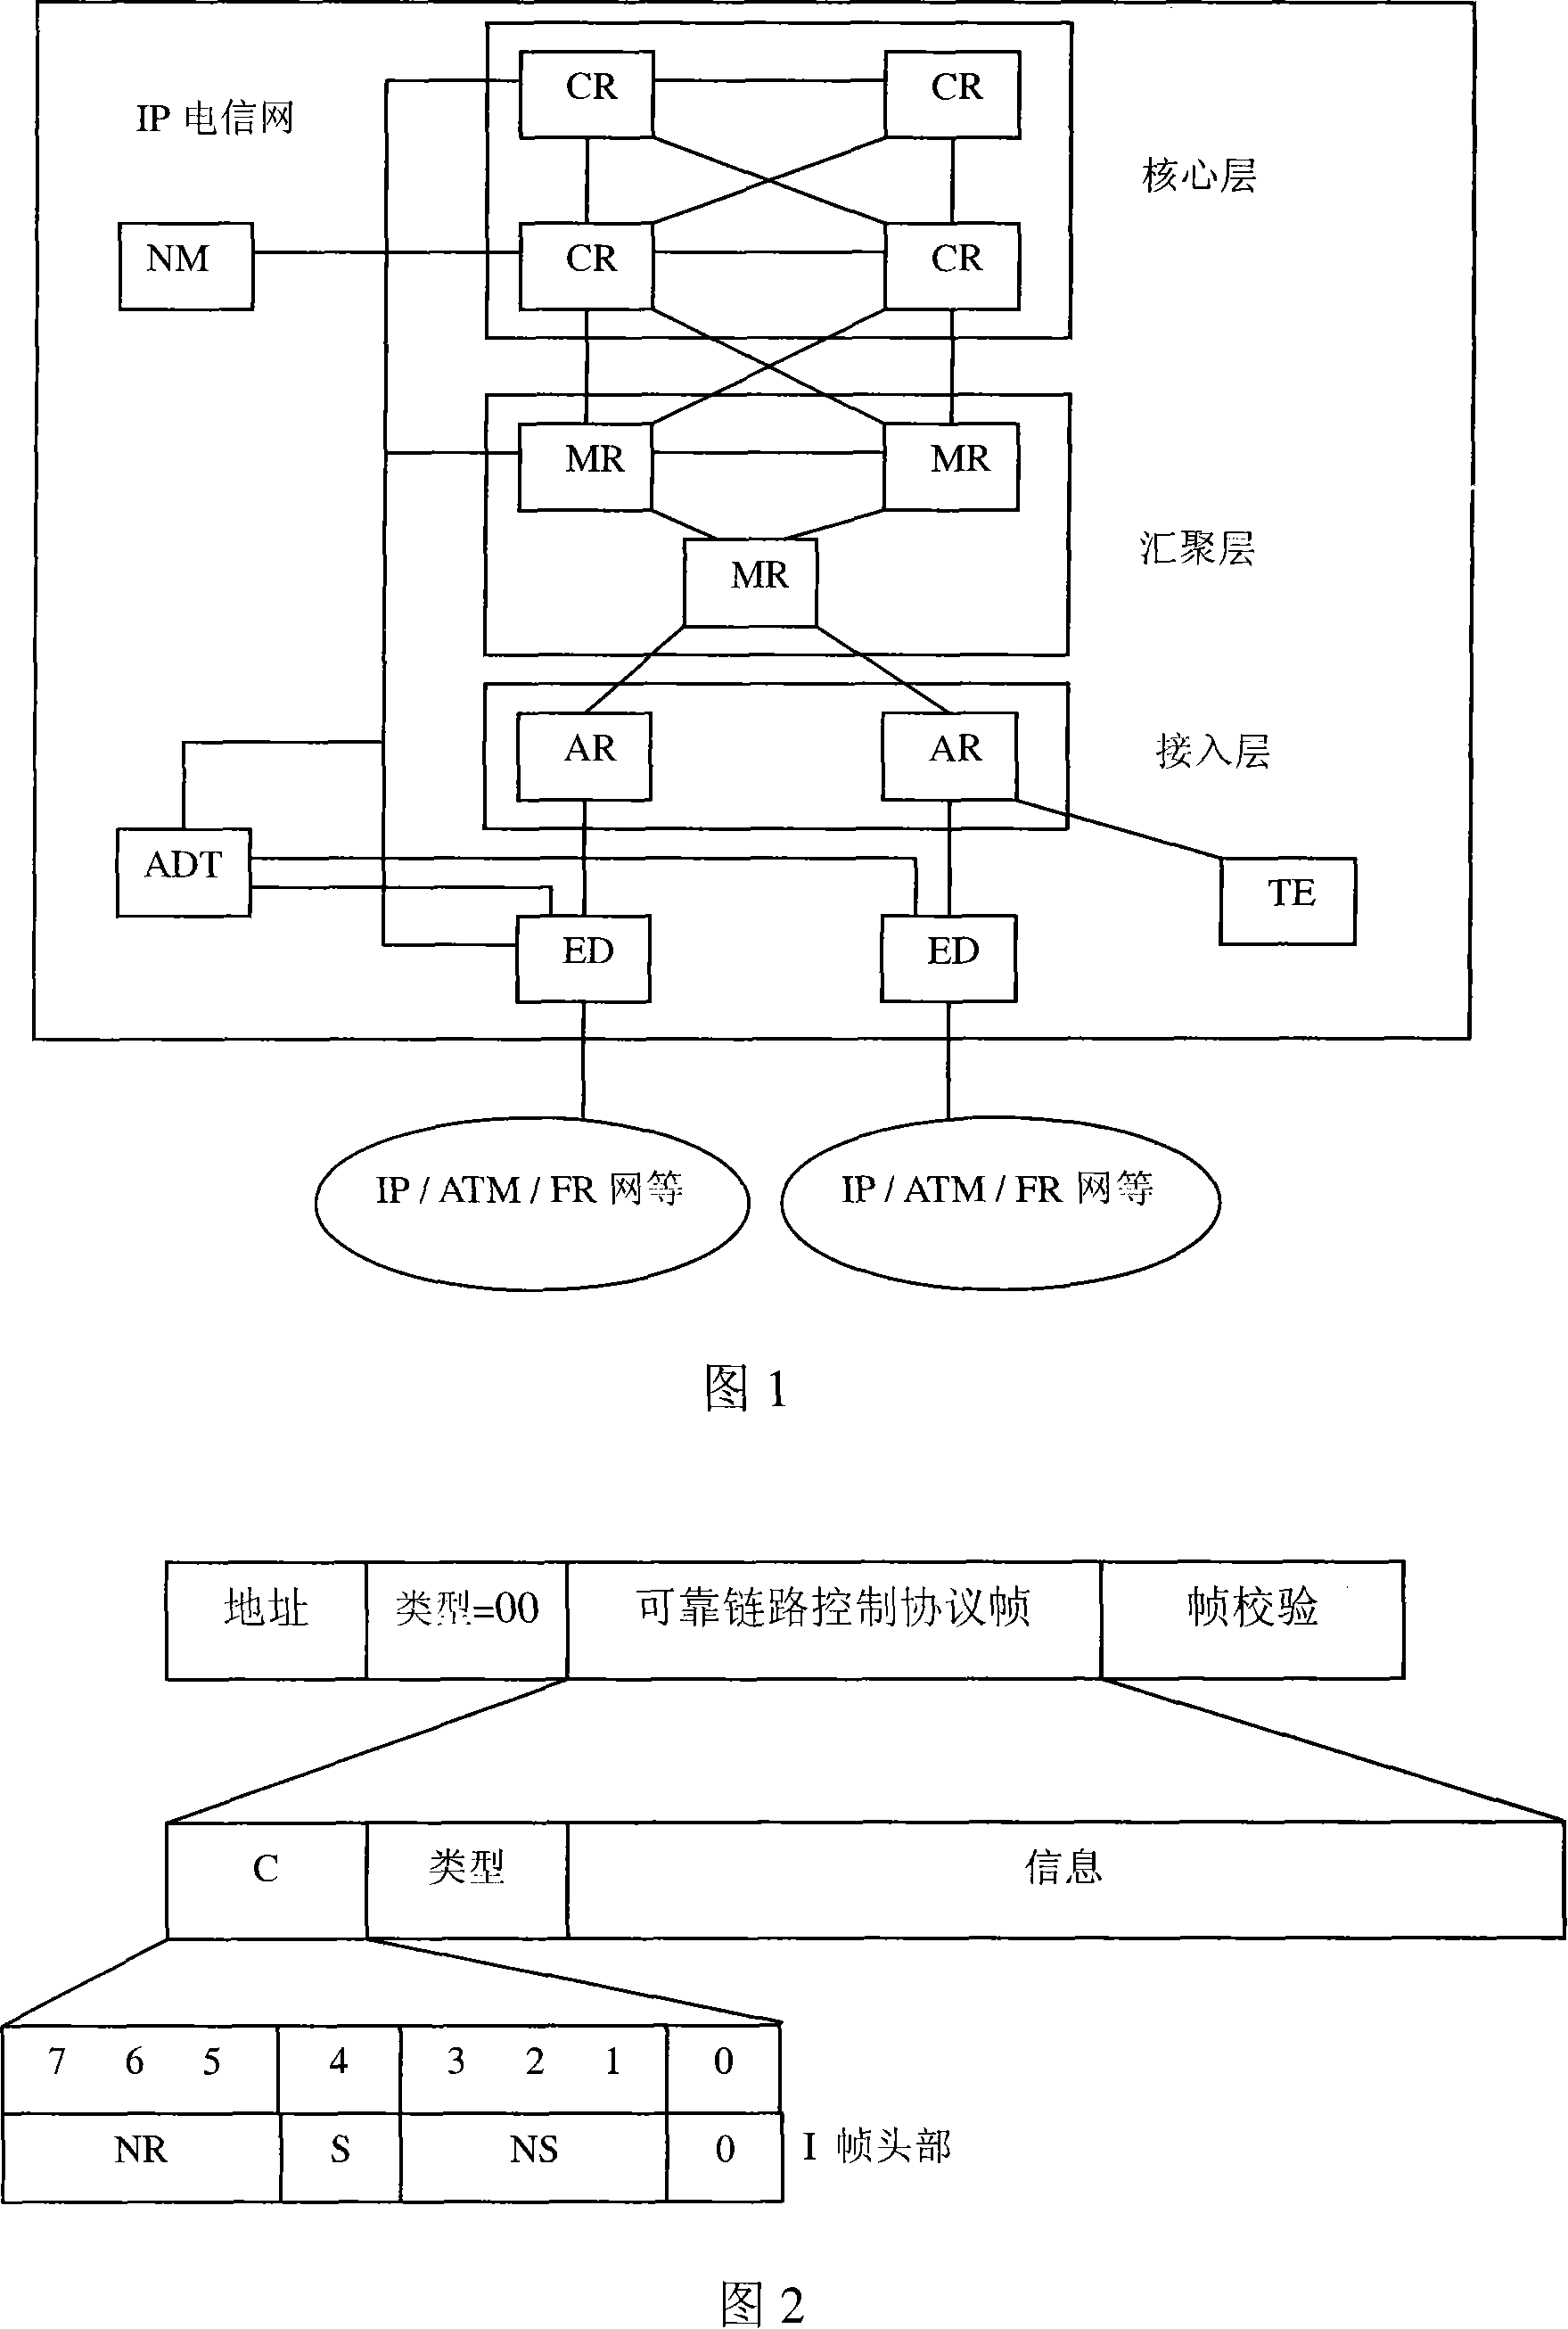 Data transmission method for integrated service of IP telecommunication network system